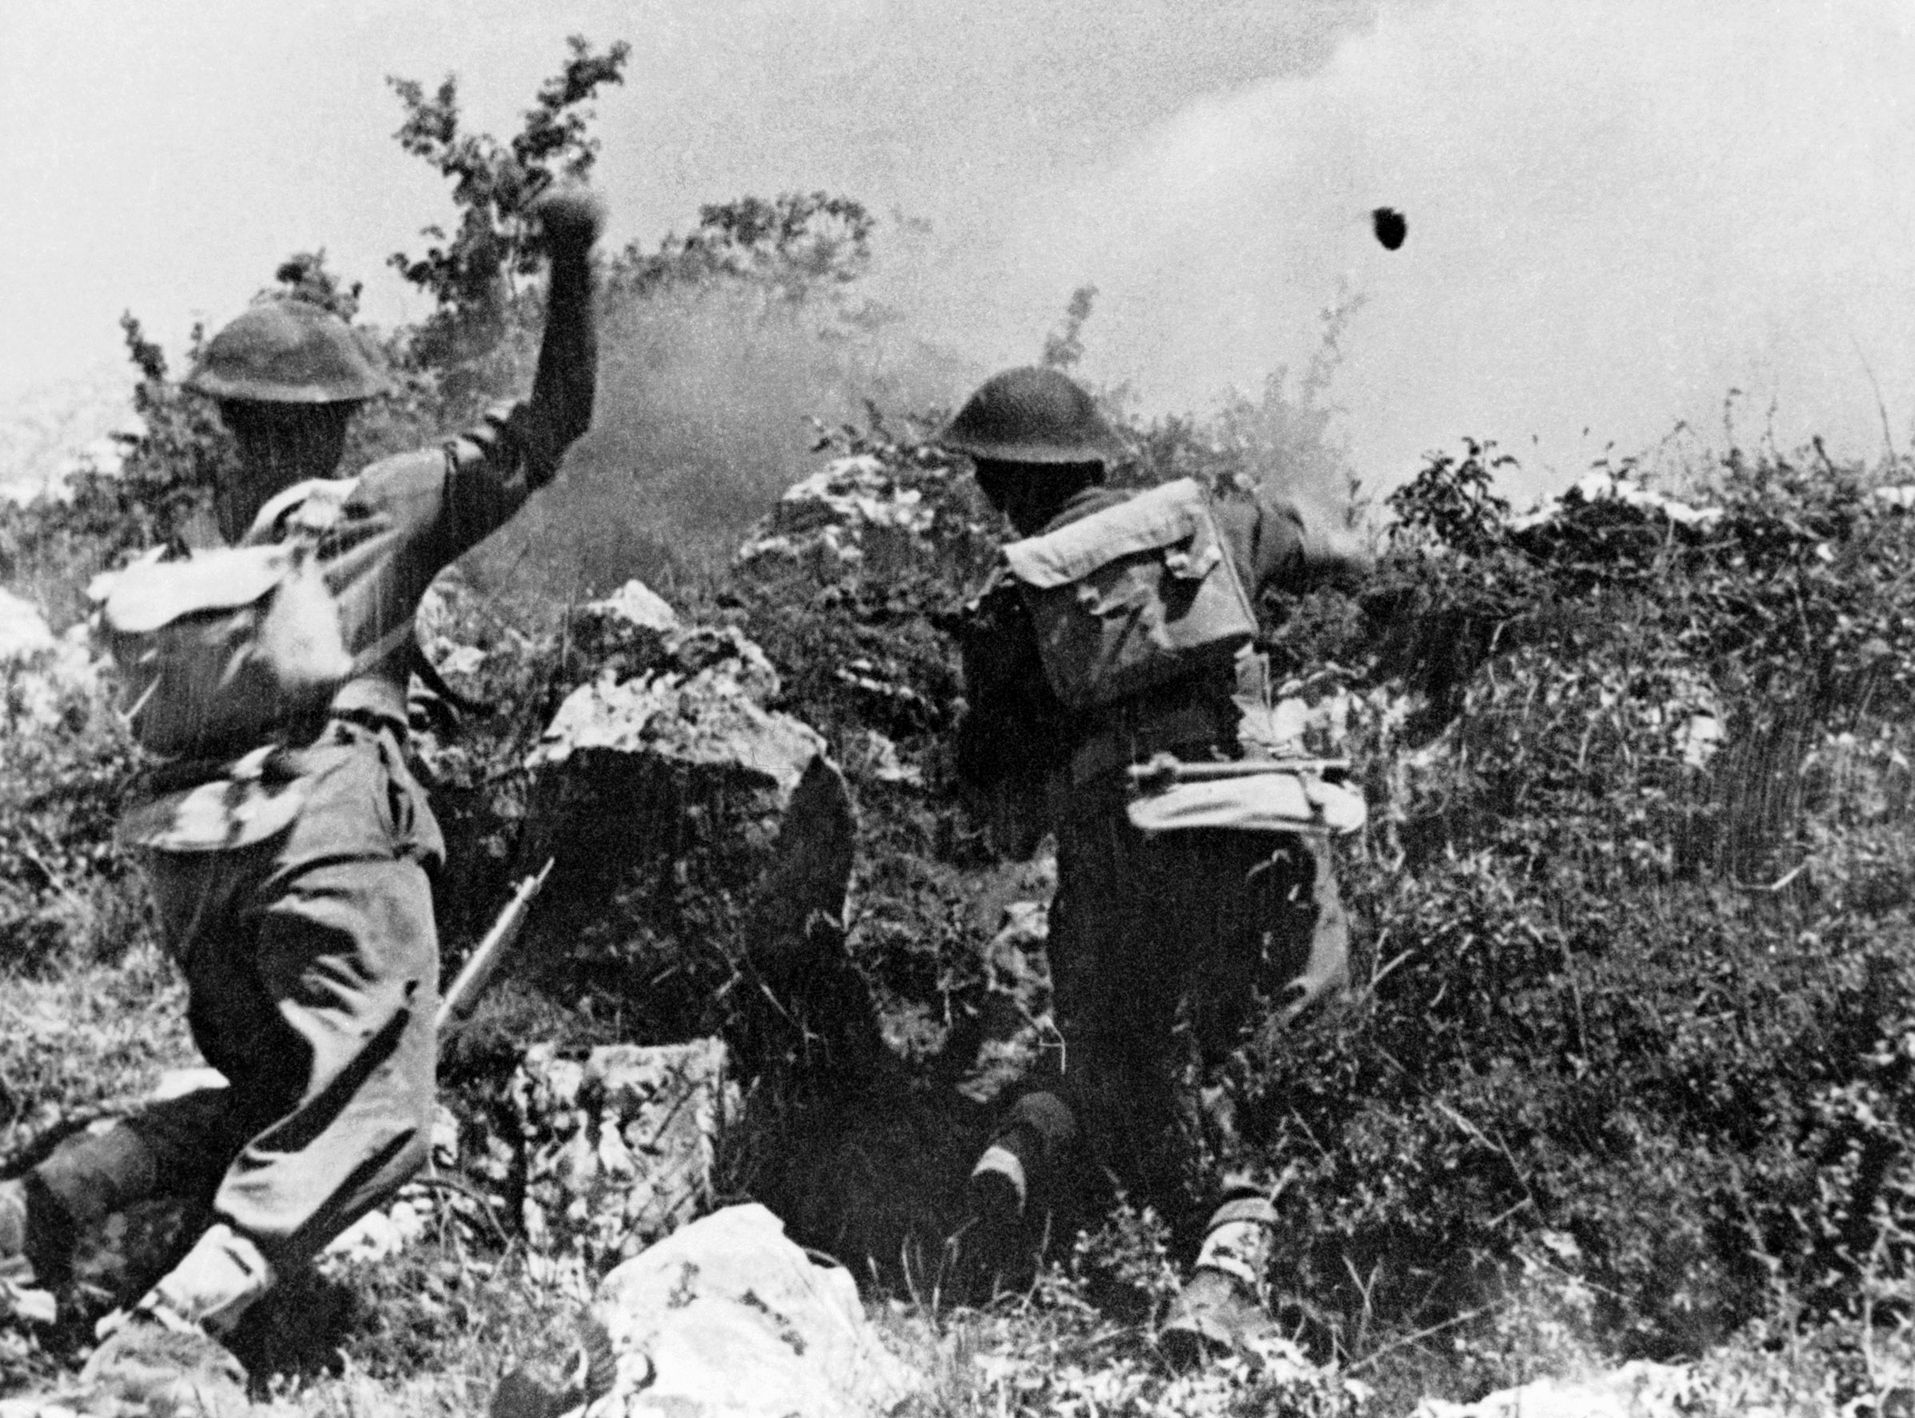 Attacking a German position near the monastery with grenades, Polish troops work their way to the summit.